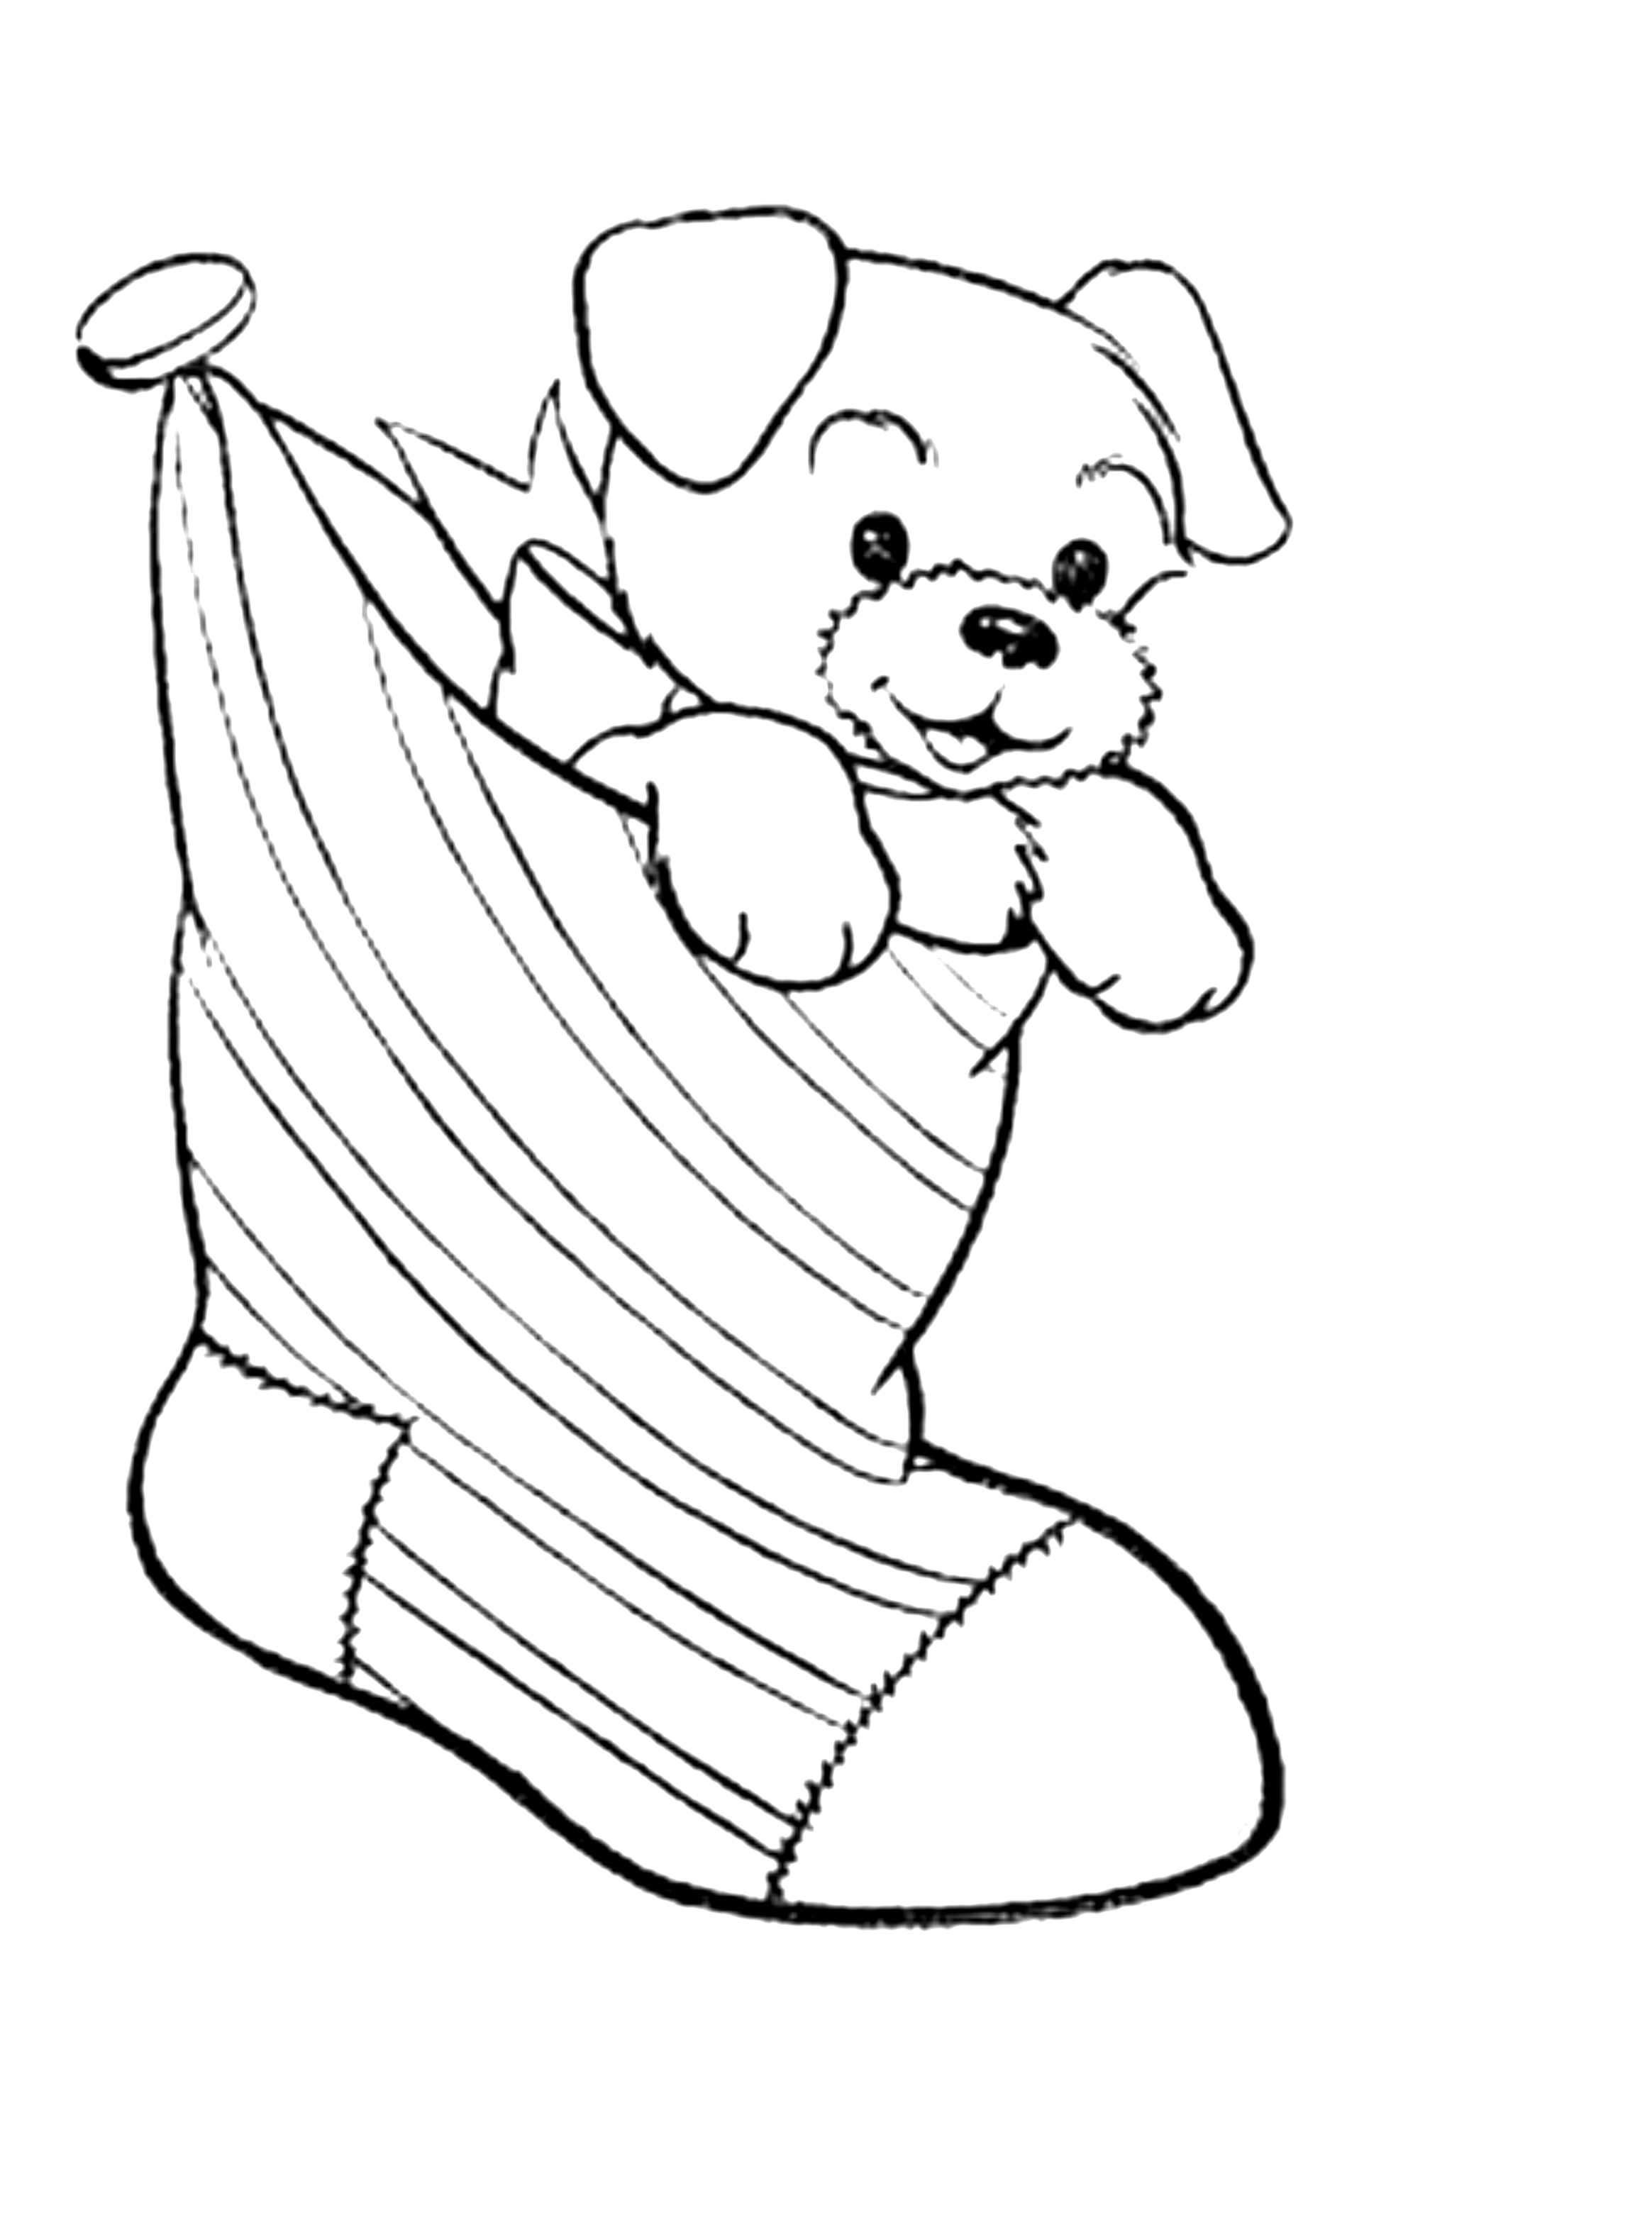 free-puppy-coloring-pages-of-free-puppy-coloring-pages Free Puppy Coloring Pages Animal 